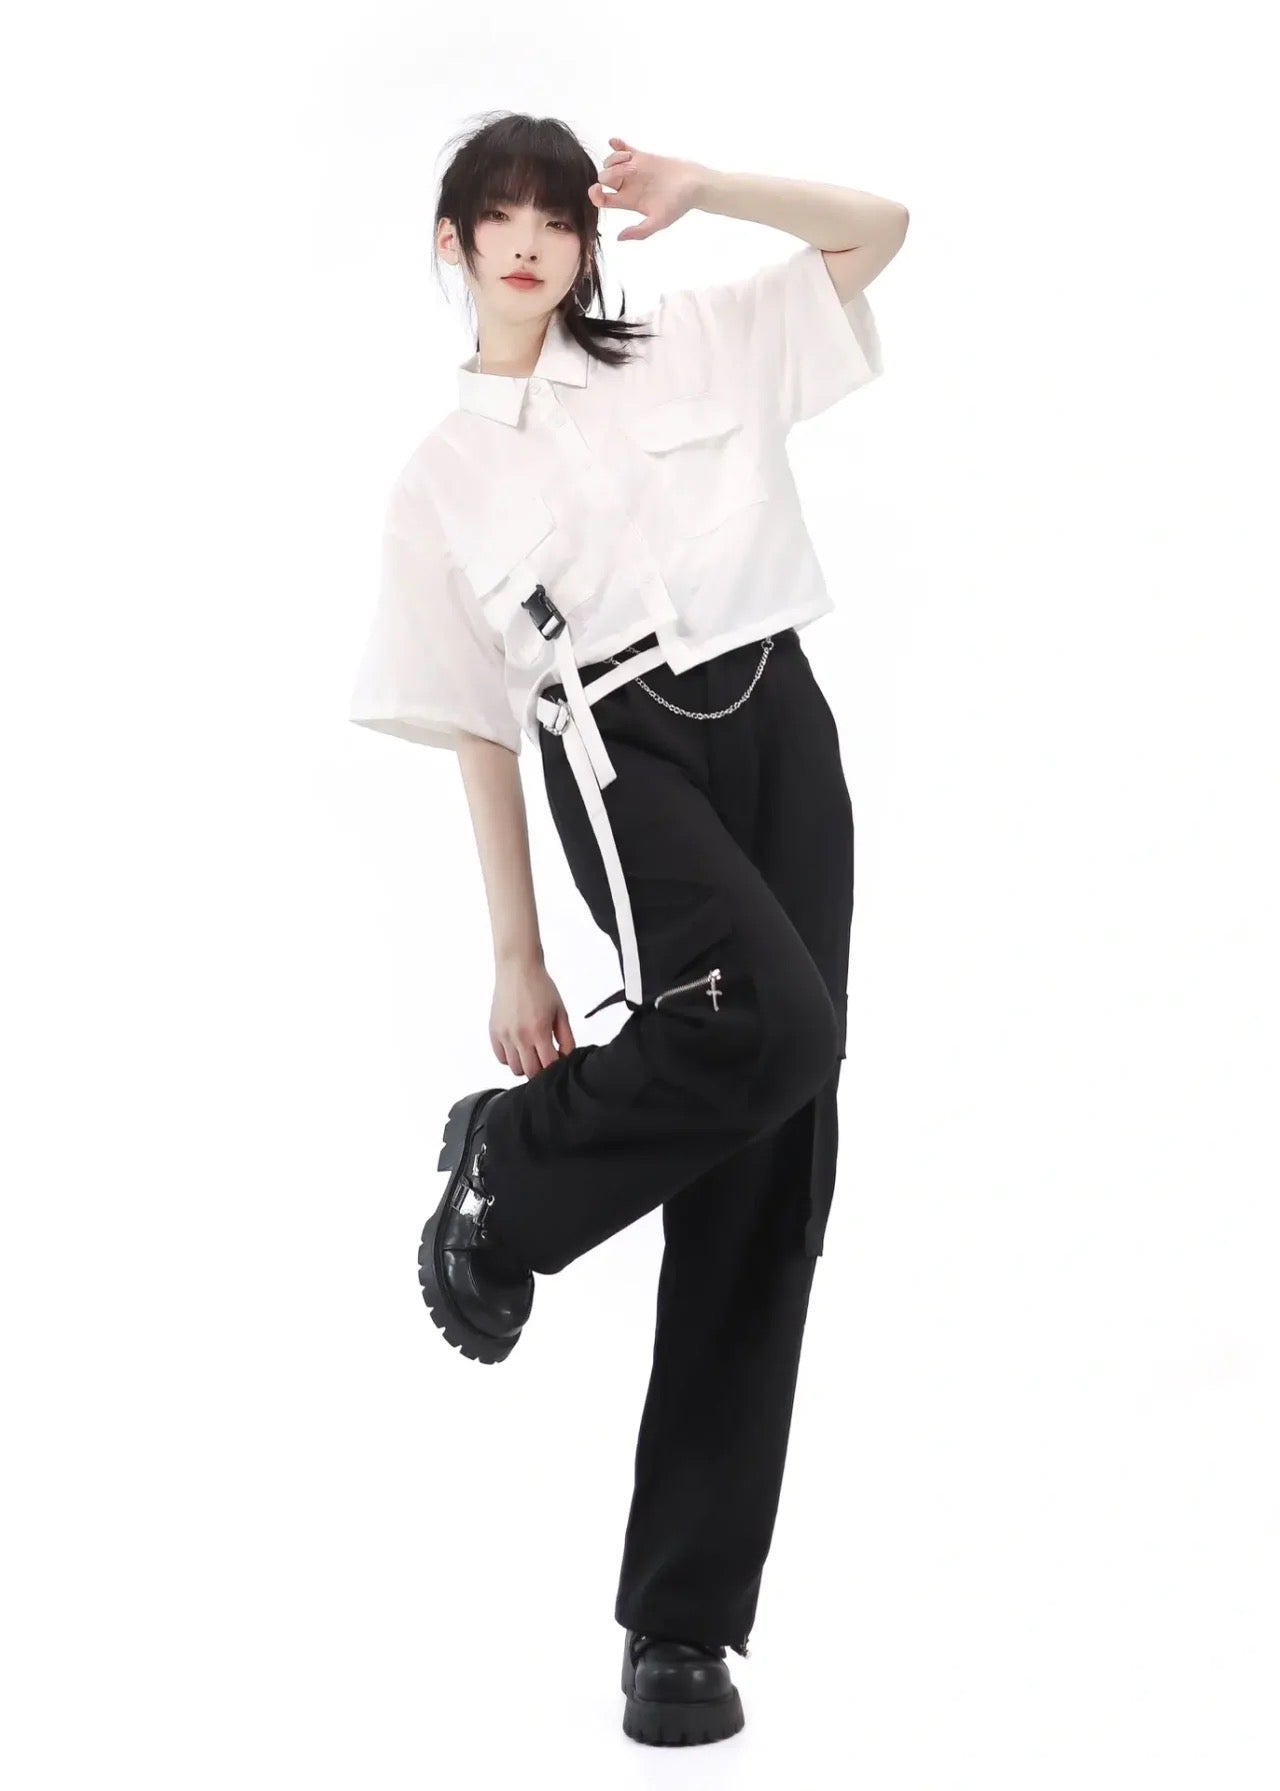 Black and White Work Shirt and Casual Work Pants